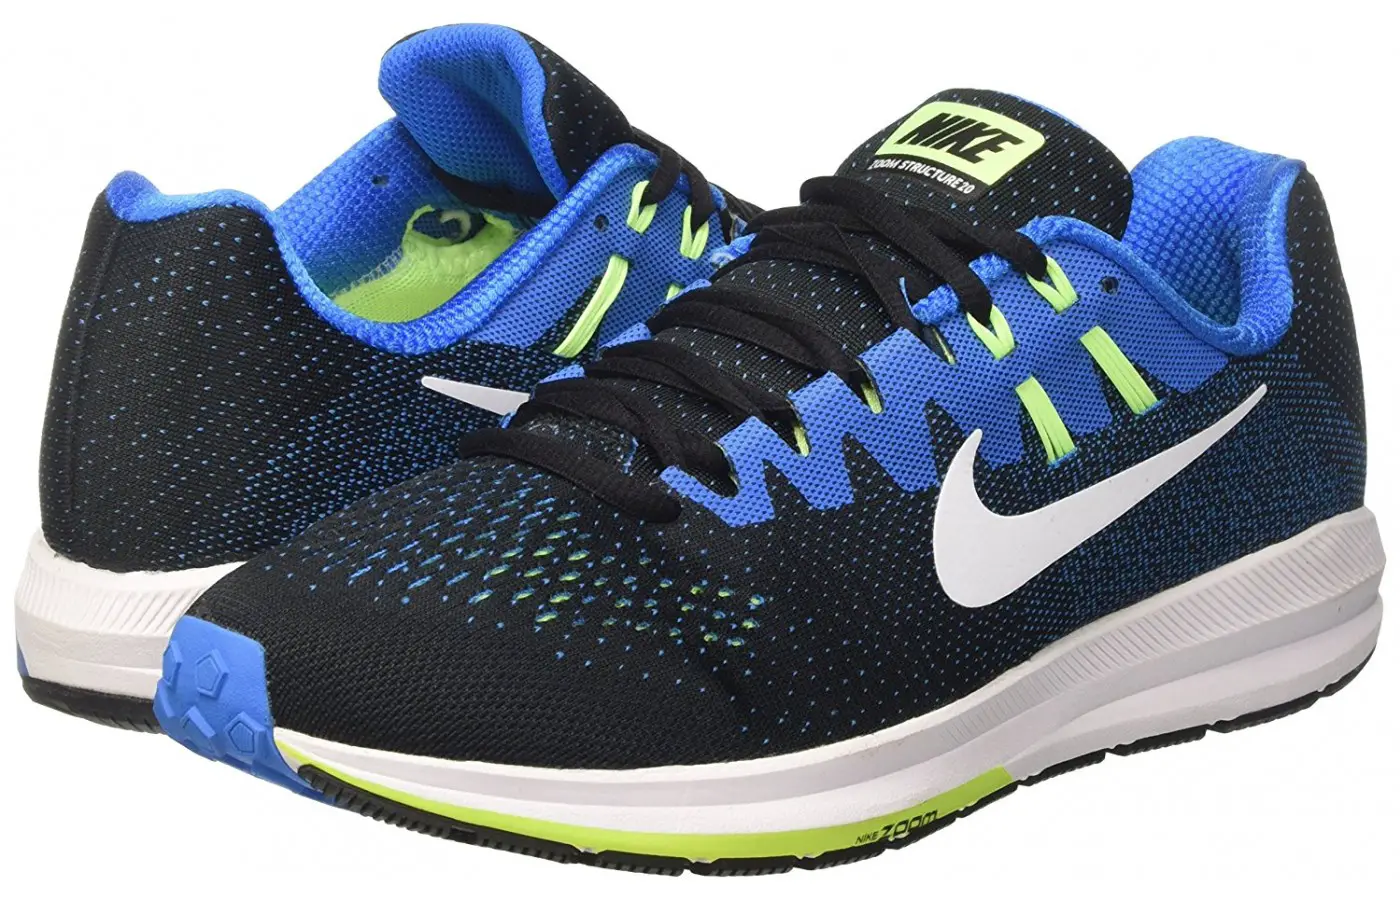 Pair of the Nike Air Zoom Structure 20 running shoe